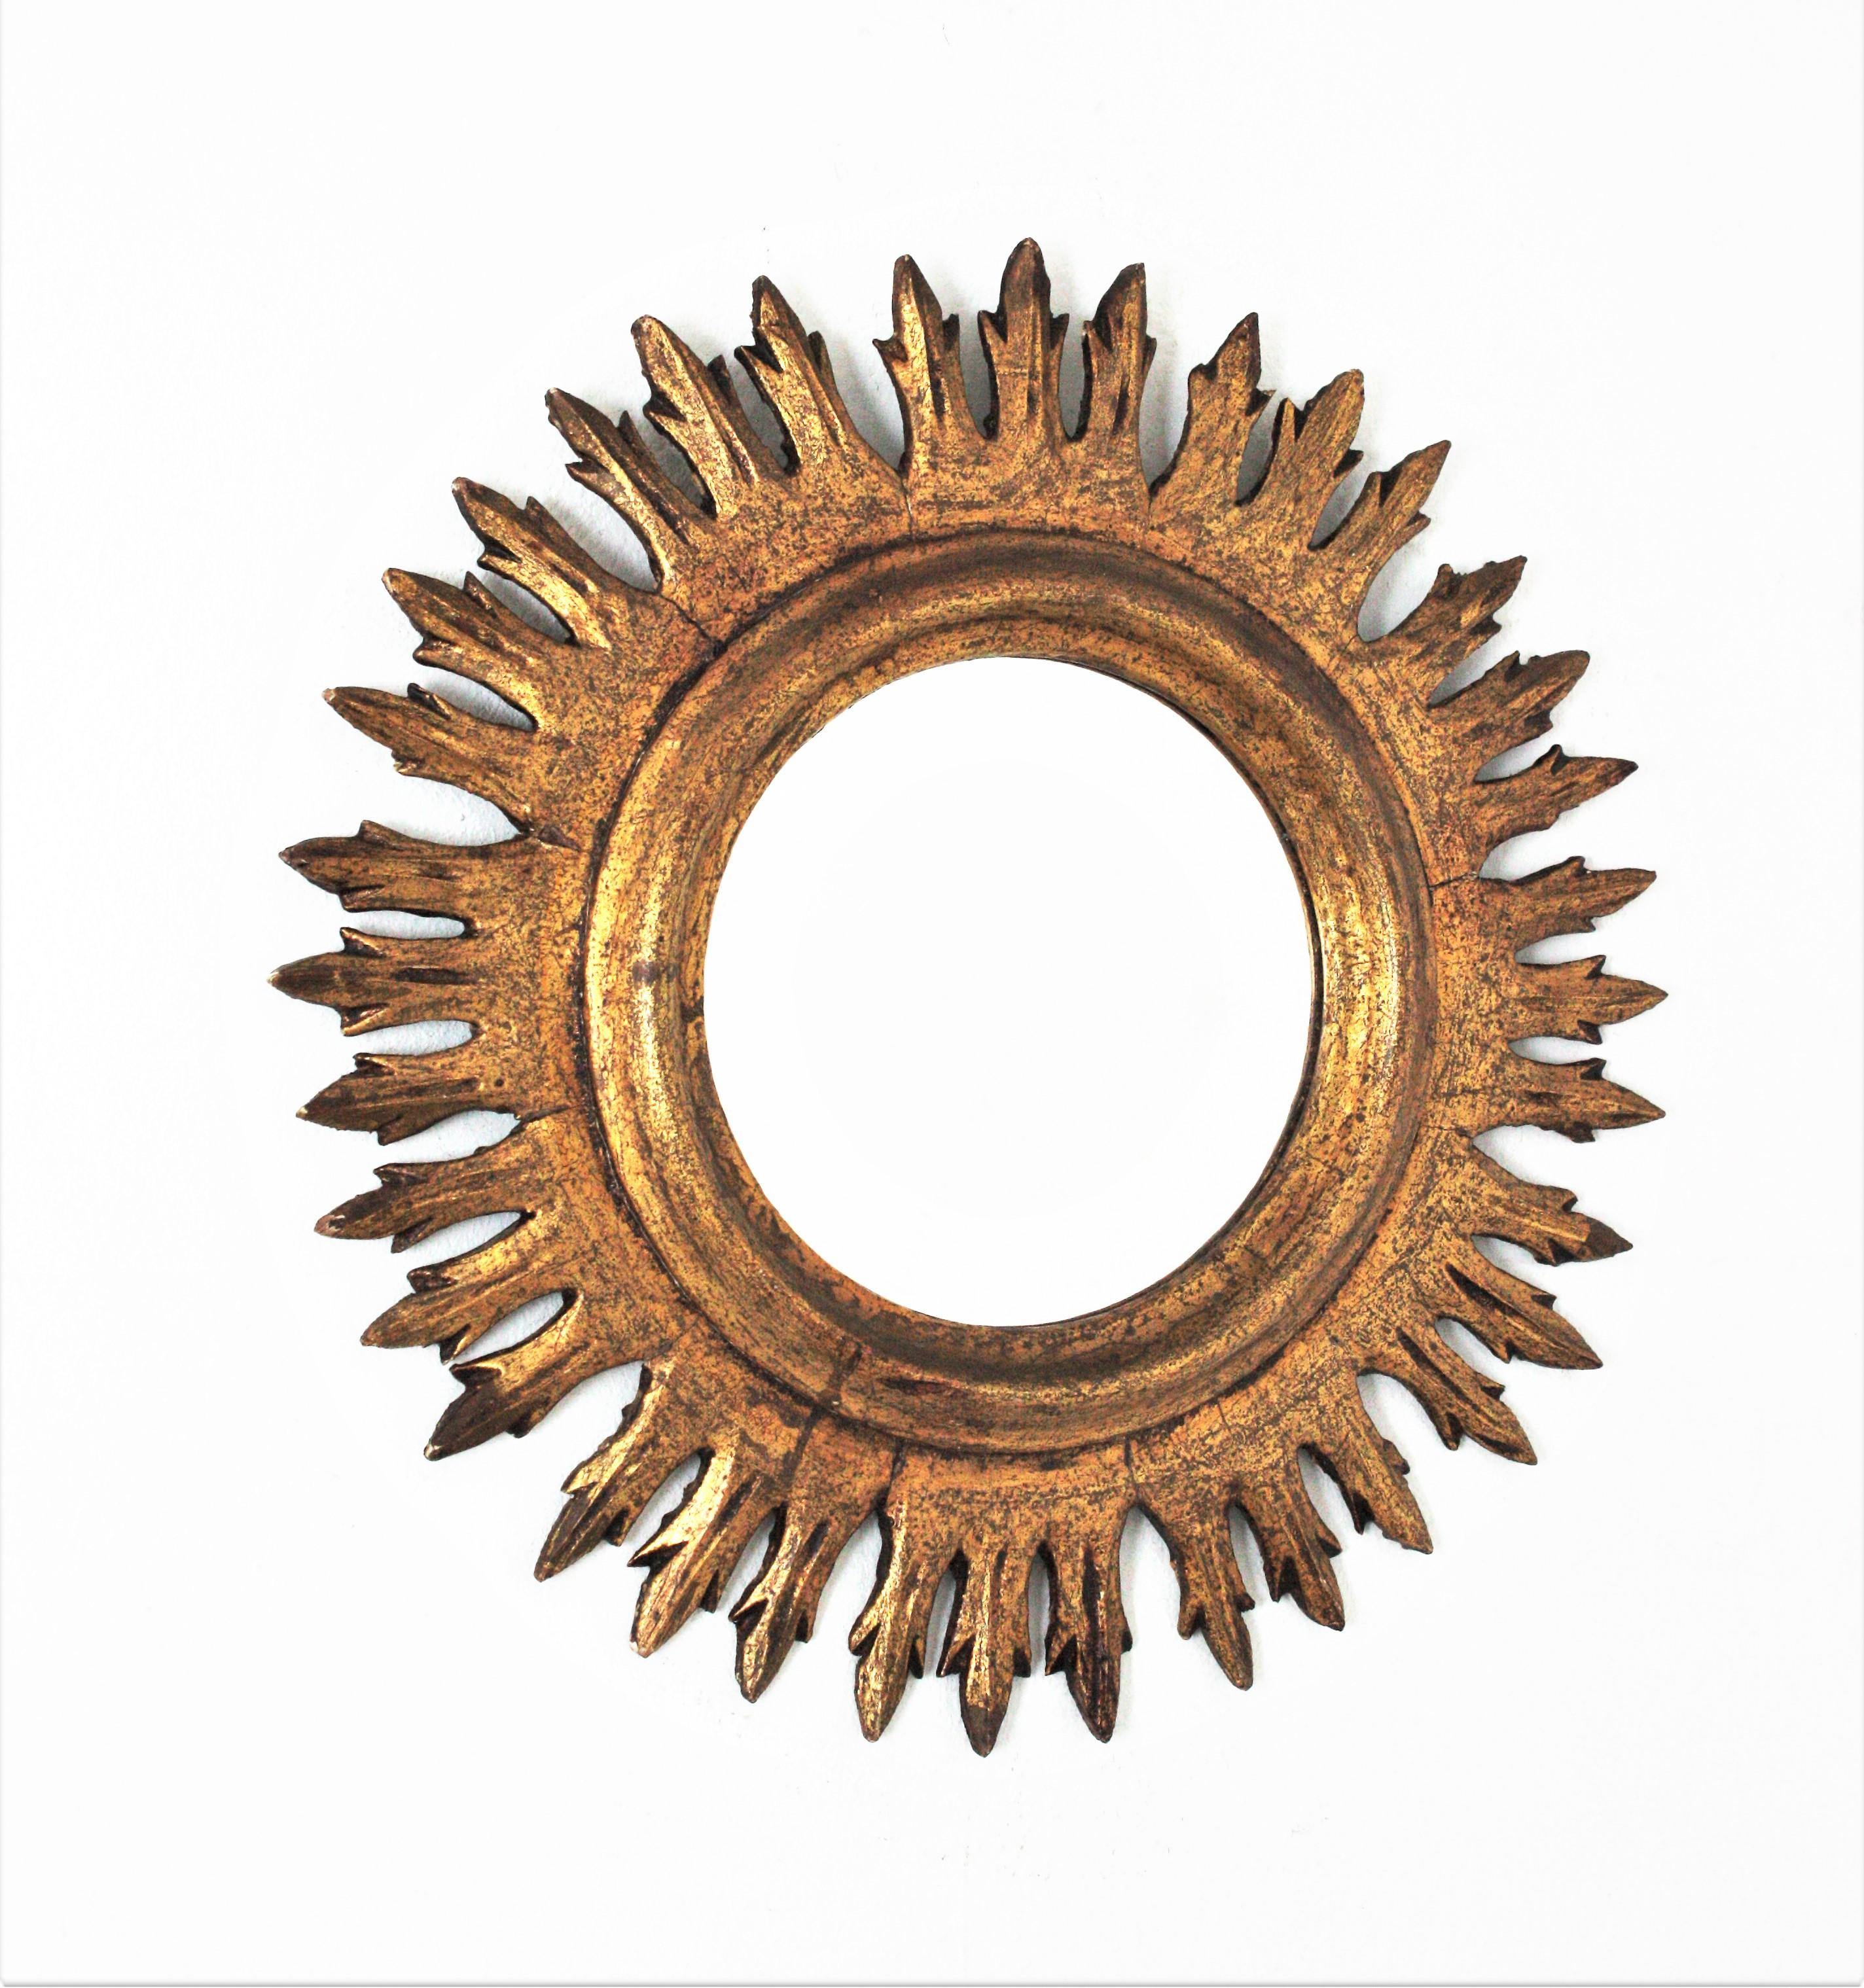 Round Sunburst Mirror, Giltwood, Gold Leaf, Spain, 1960s
Handcrafted sunburst mirror with short rays.
Original gold leaf gilding and nice patina.
This sunburst mirror combines Midcentury and Baroque accents. It will be a nice addition to any